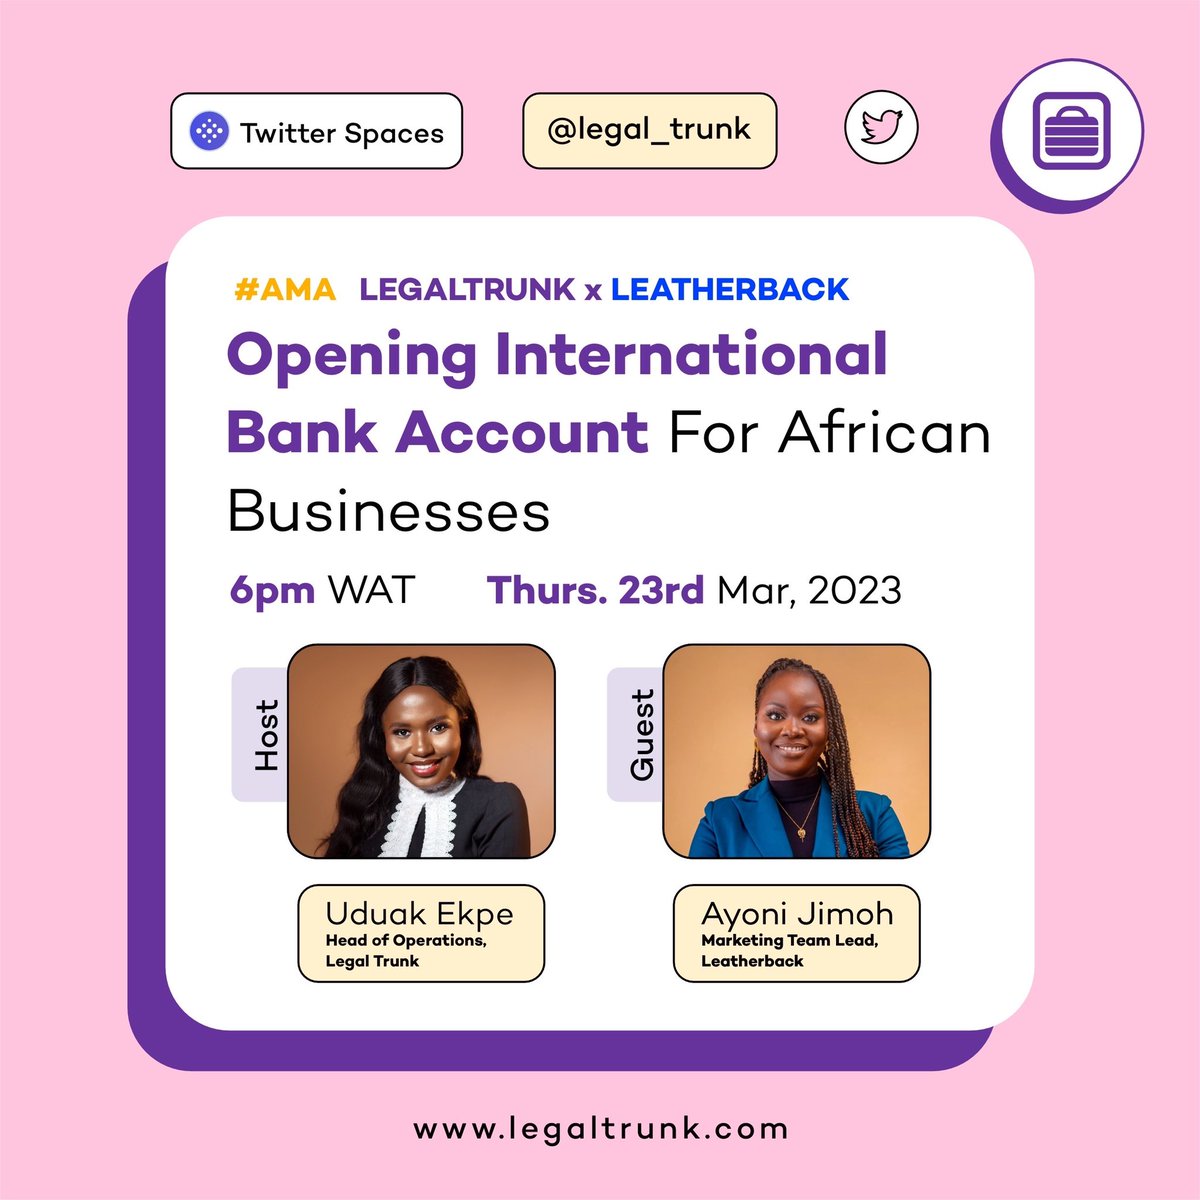 Join our twitter space with @legaltrunk tomorrow where we answer any questions you may have about our recent partnership. 

We’ll also talk about what it entails to open international bank accounts for African businesses, and share helpful information surrounding this process.